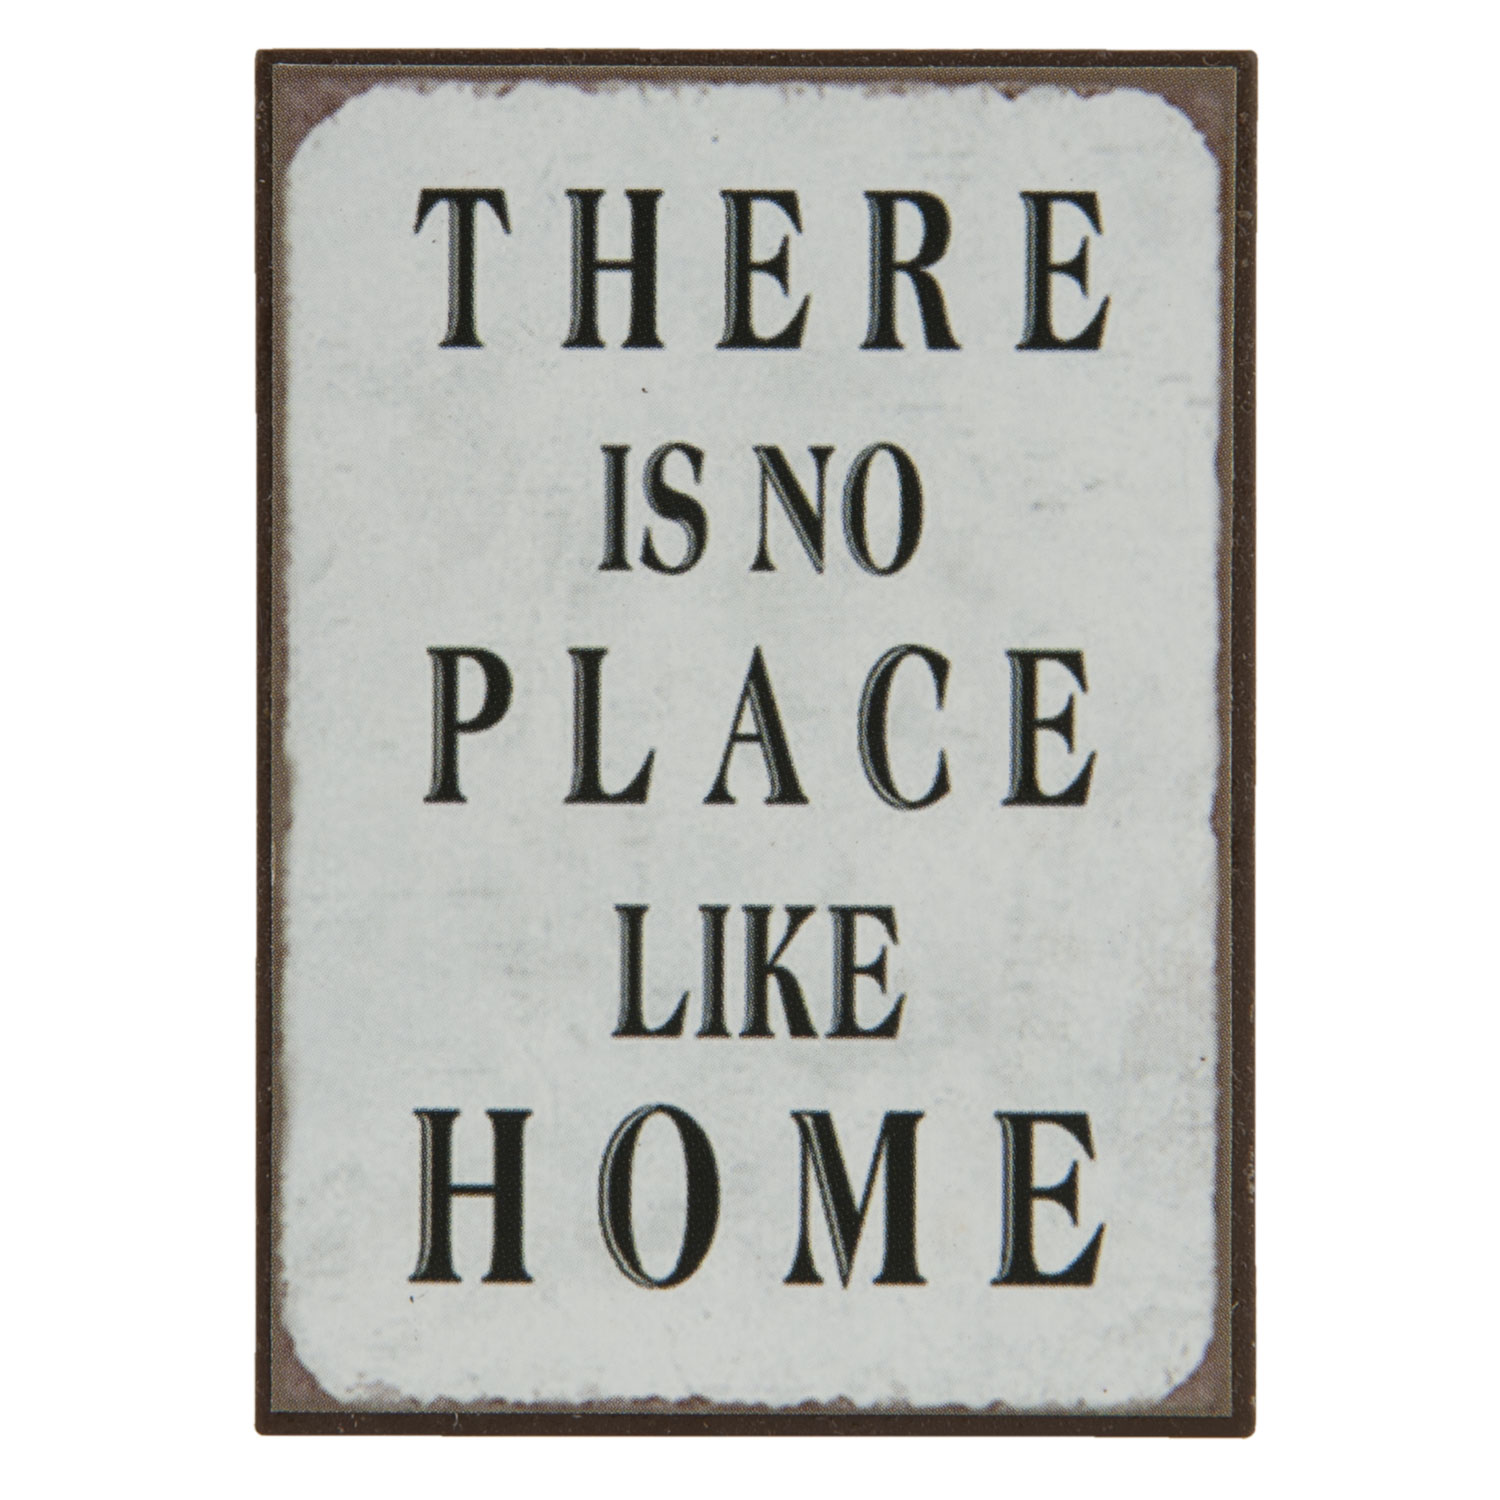 There s no place like home. There is no place like Home.